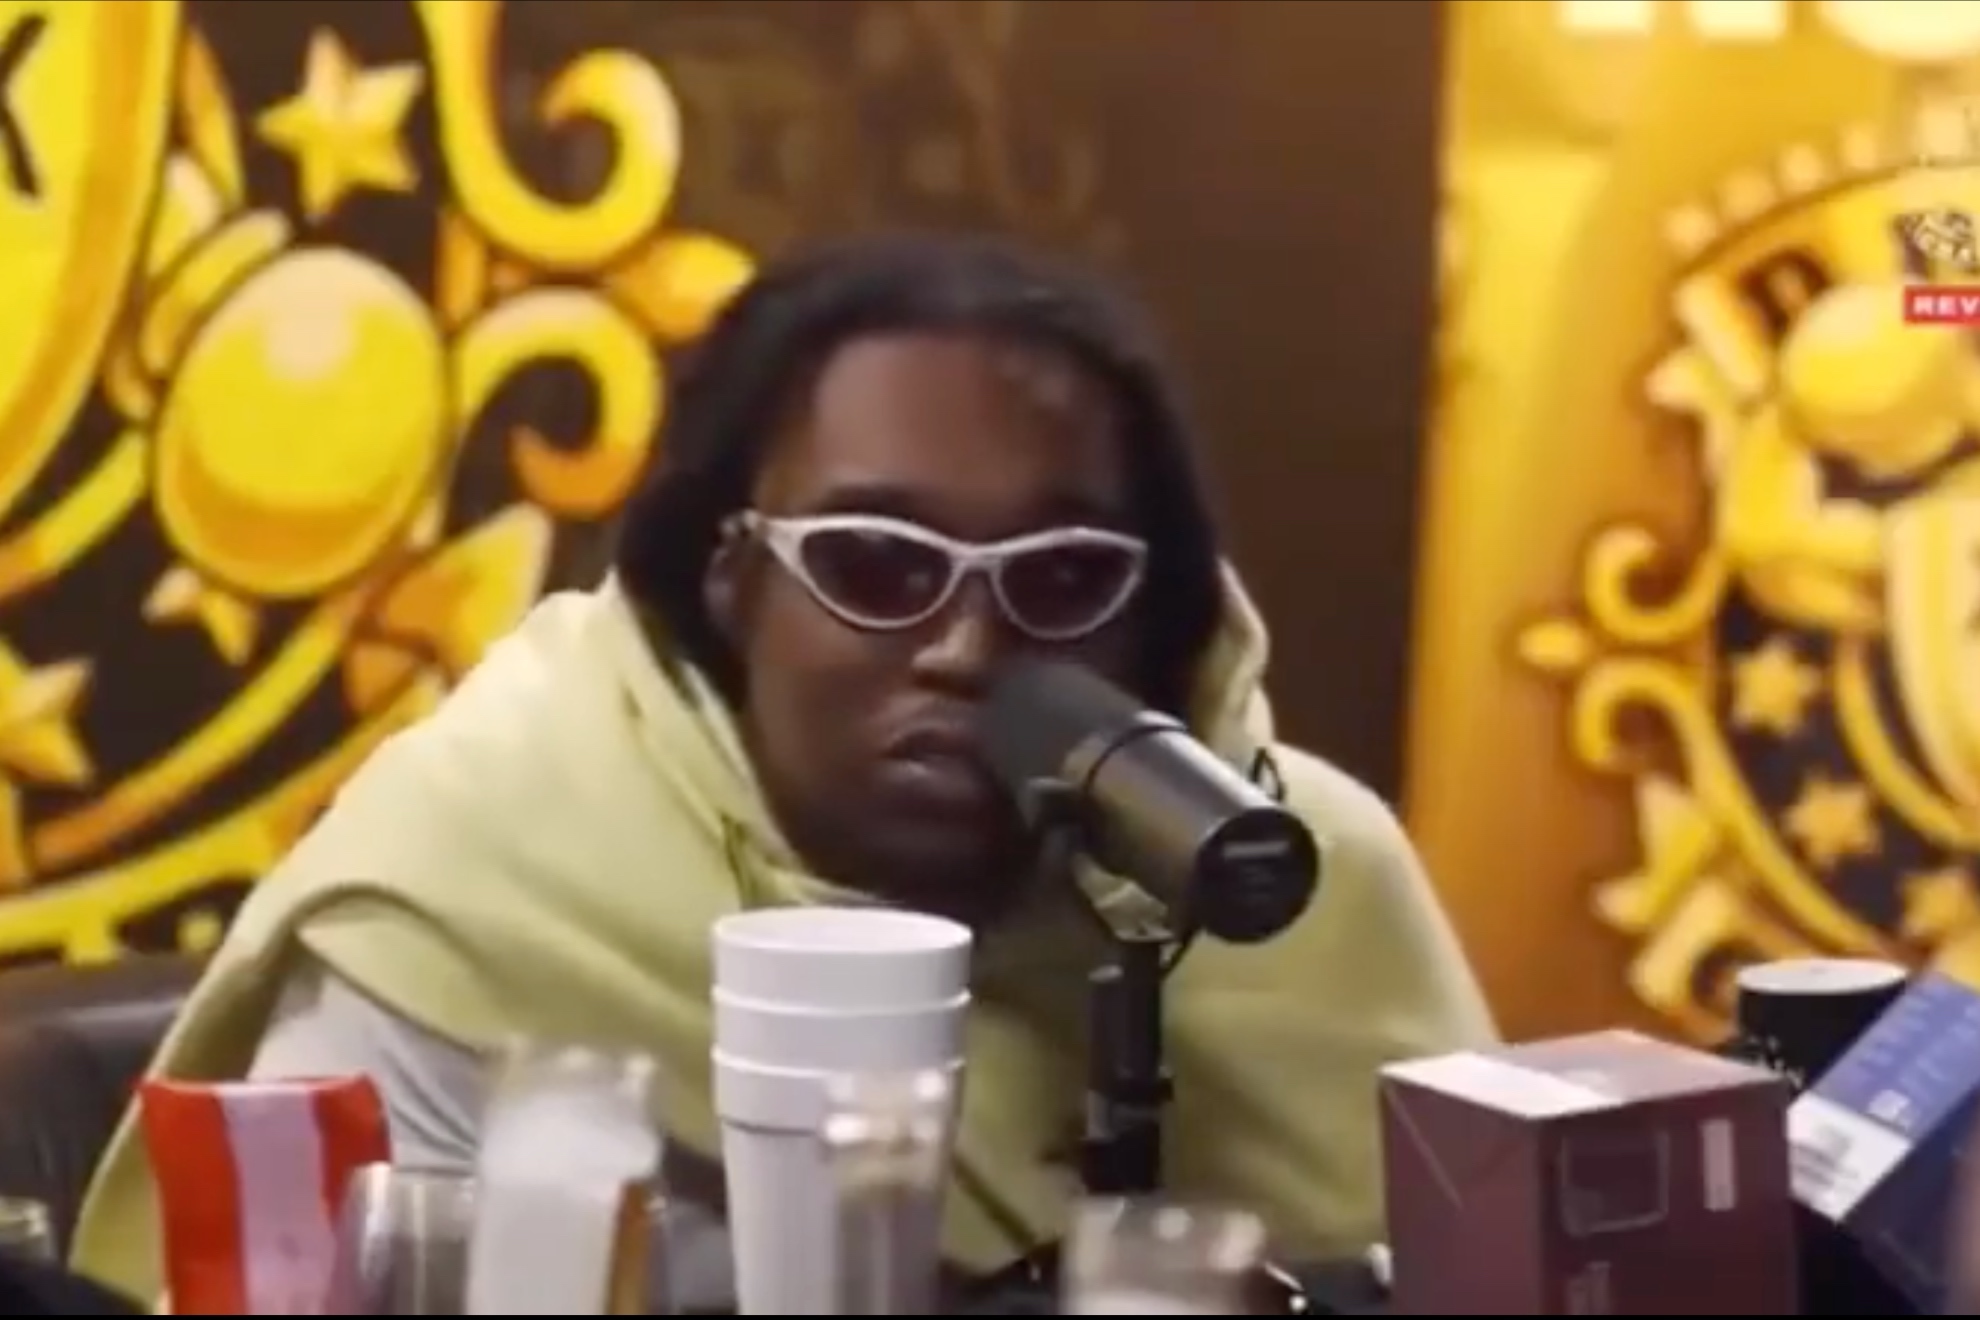 Takeoff's prophetic comments one week before he was shot to death